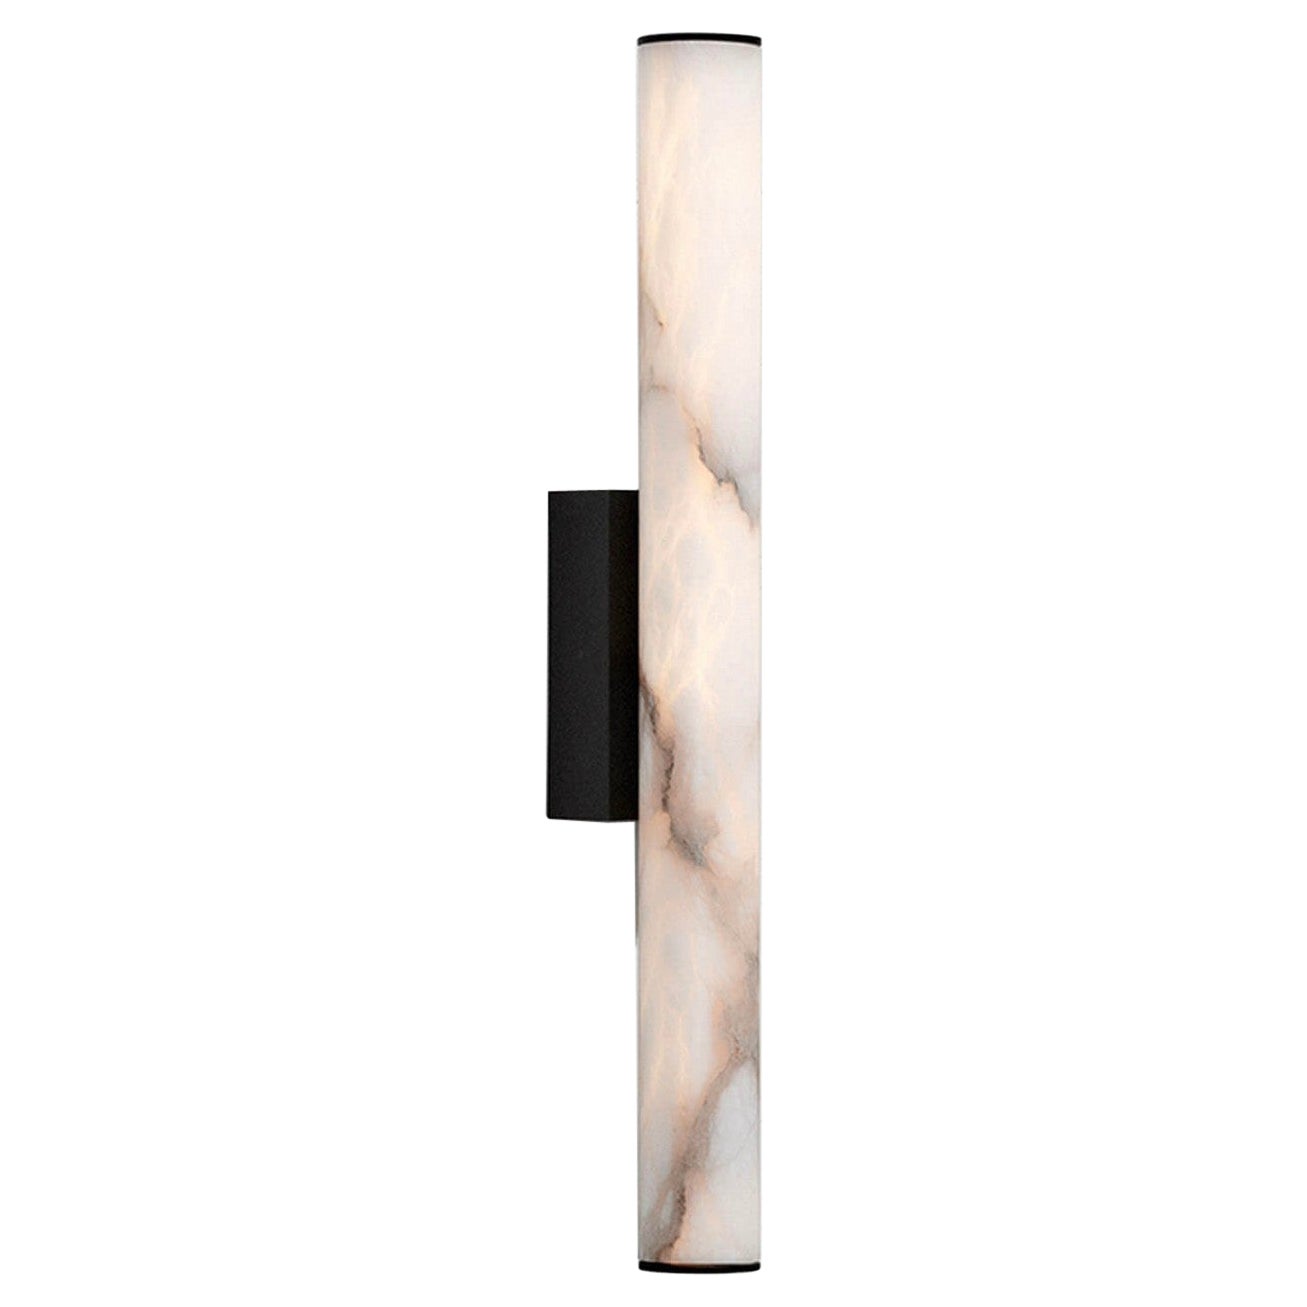 Alabaster and Patinated Brass Wall Sconce, Callisto by Garnier&Linker